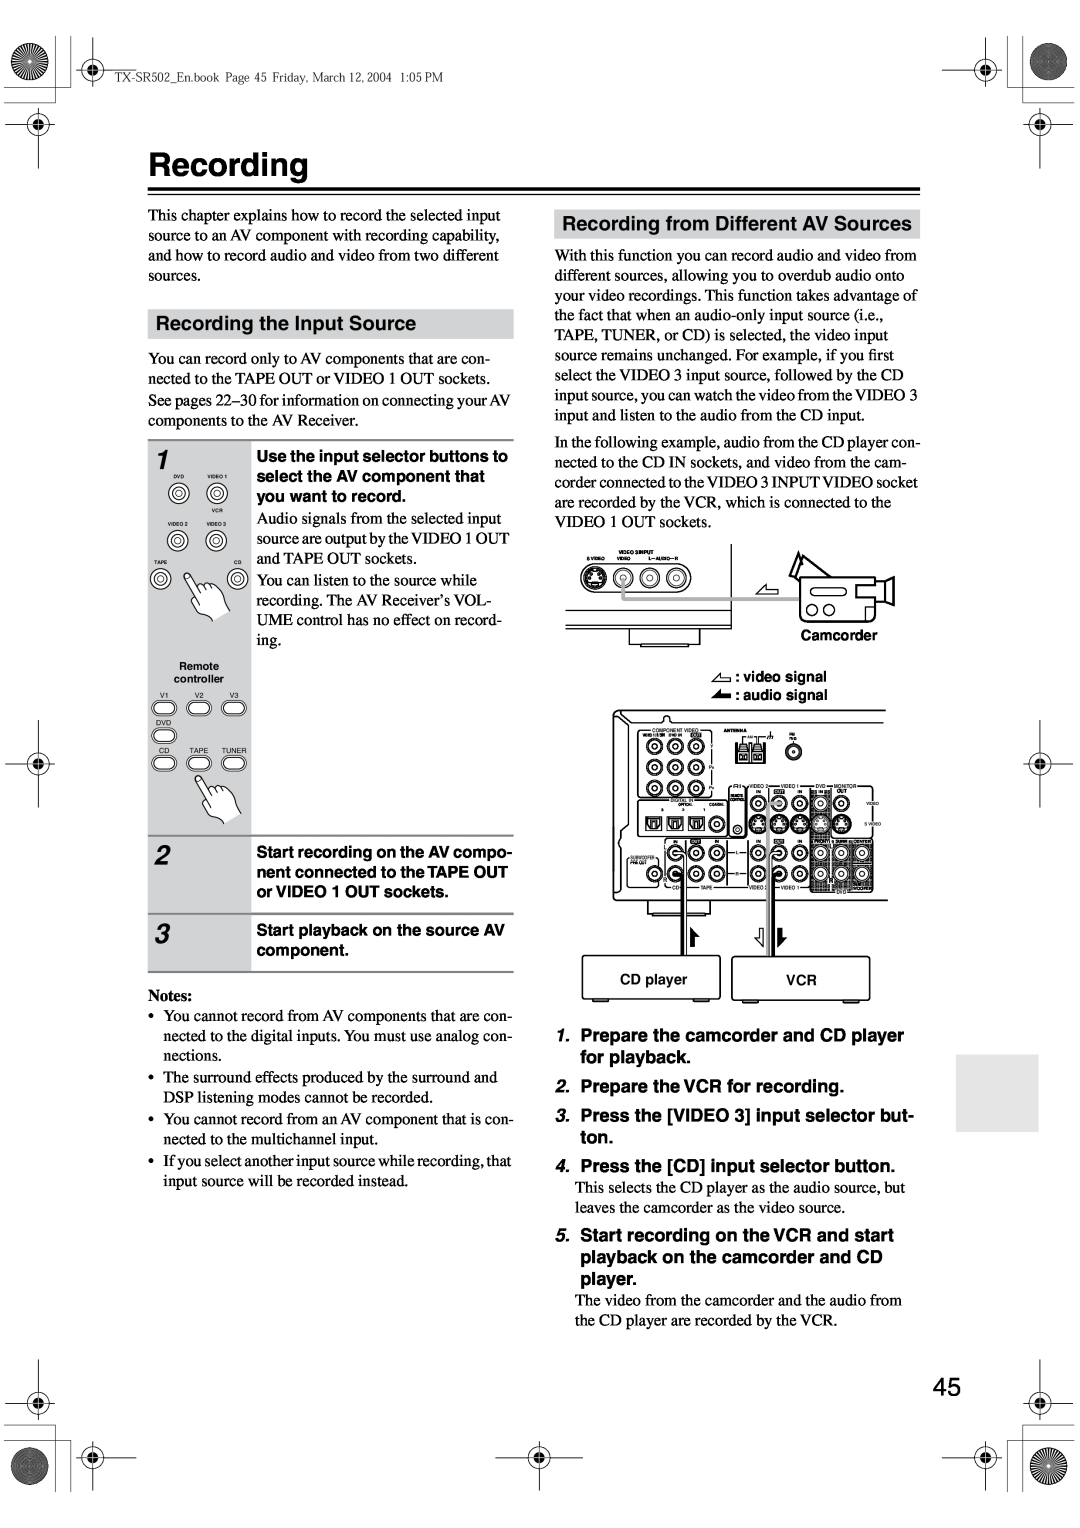 Onkyo TX-SR502E, TX-SR8250 instruction manual Recording the Input Source, Recording from Different AV Sources, Notes 